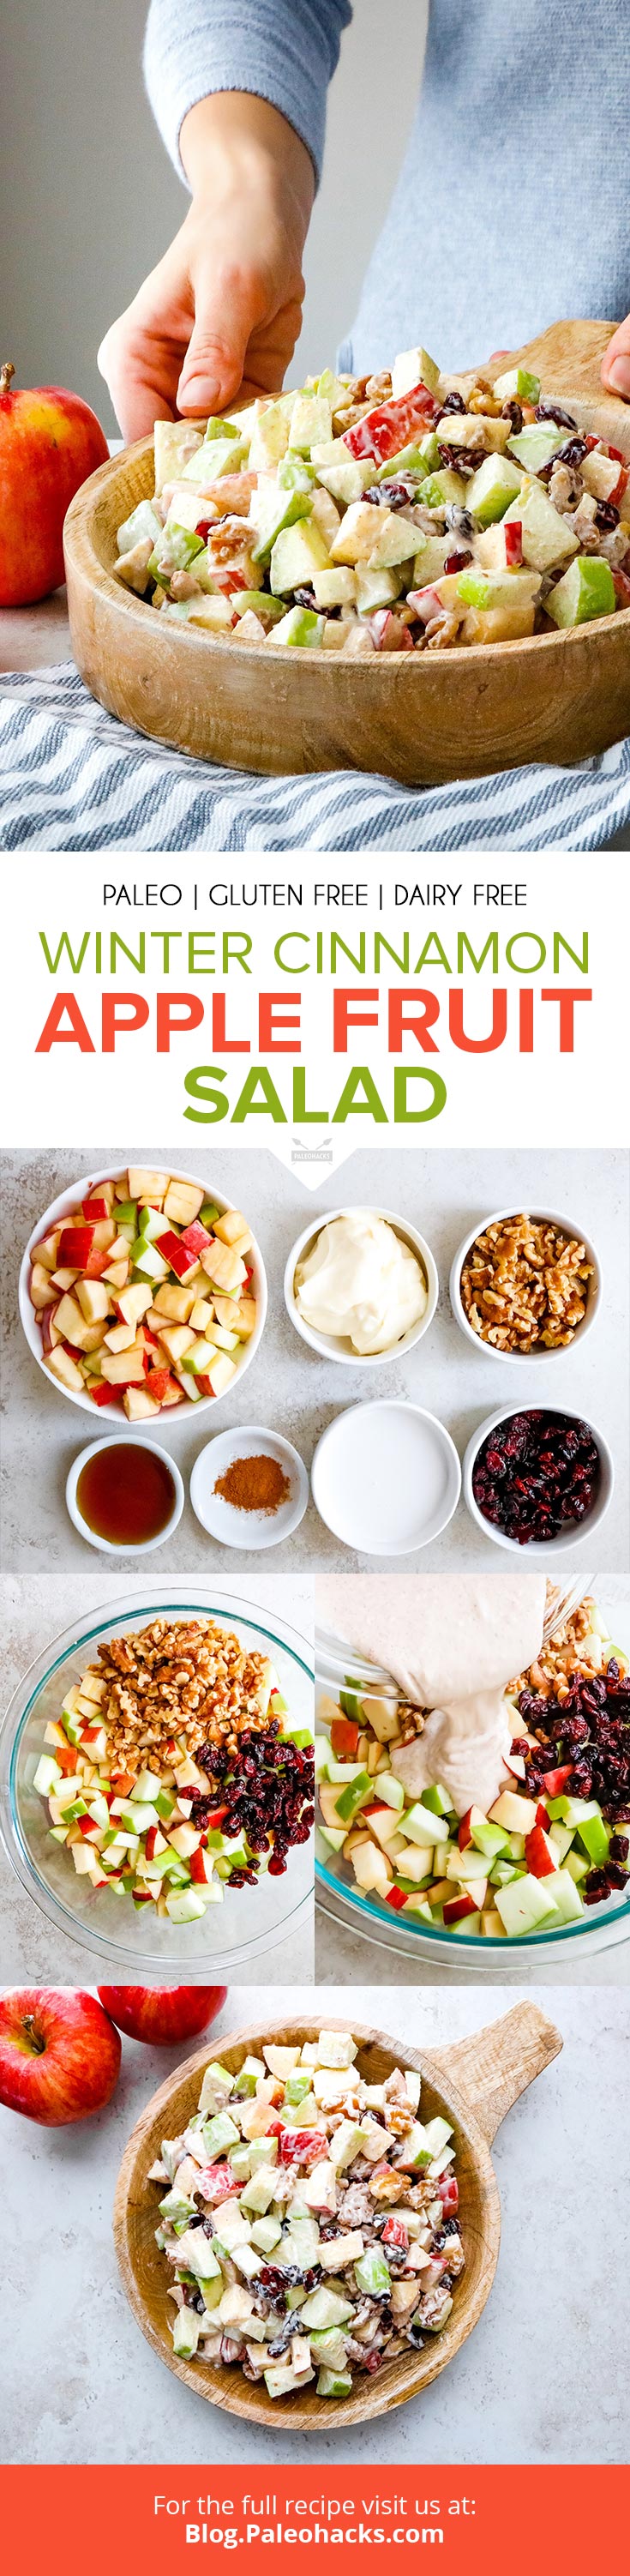 Taste the flavors of winter with a fruit salad tossed in warm spices, crunchy walnuts, and a creamy maple dressing. This Paleo fruit salad is chock-full of holiday spirit.